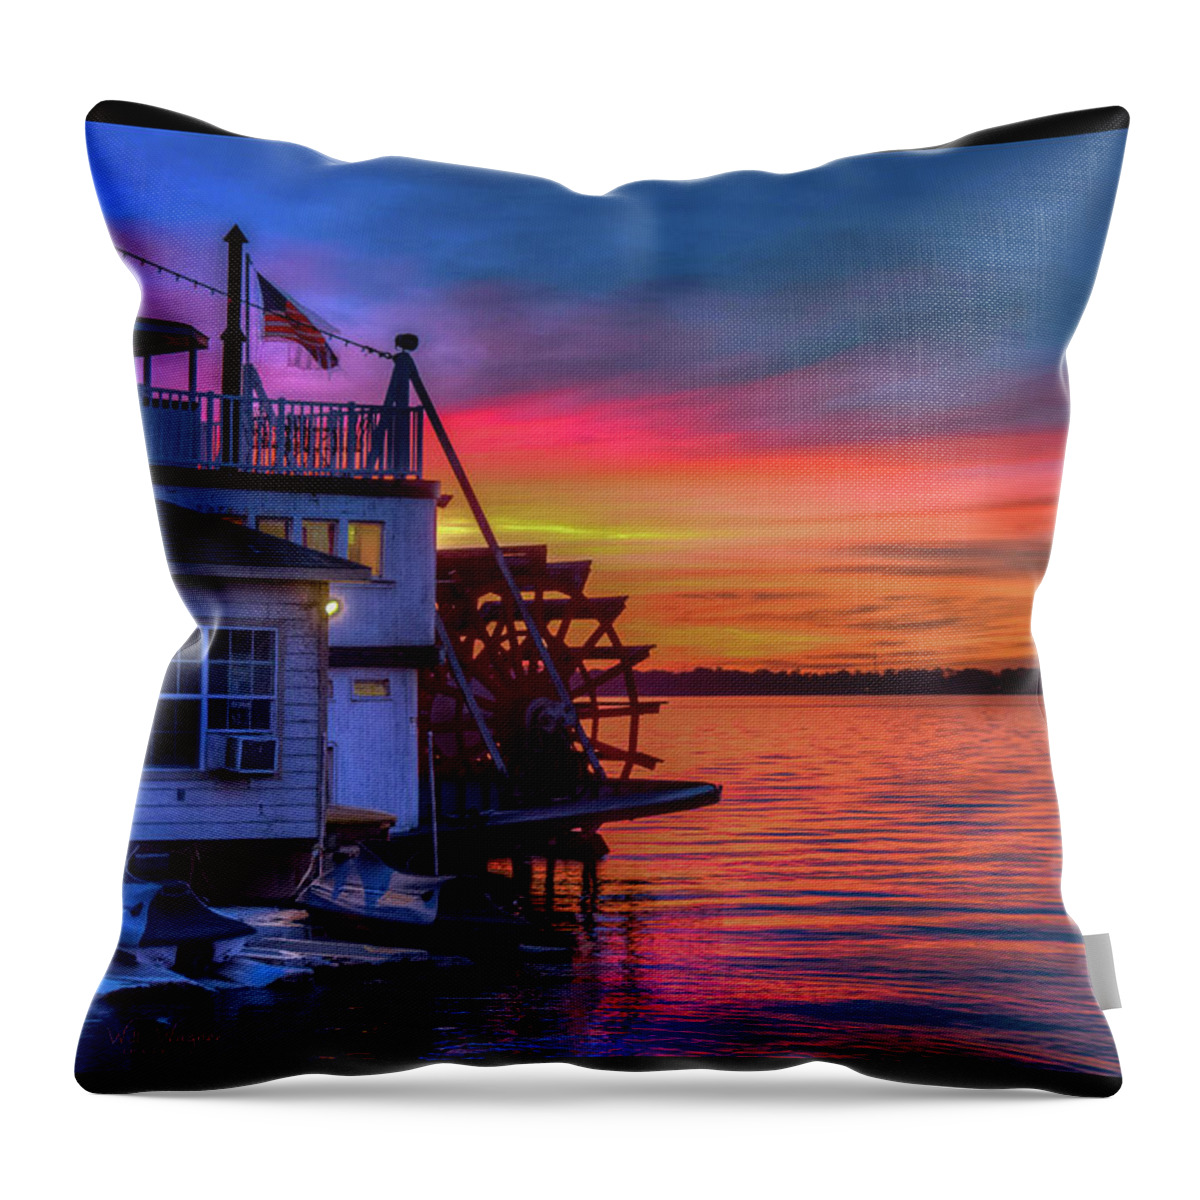 Steamboat Throw Pillow featuring the photograph Steamboat by Will Wagner